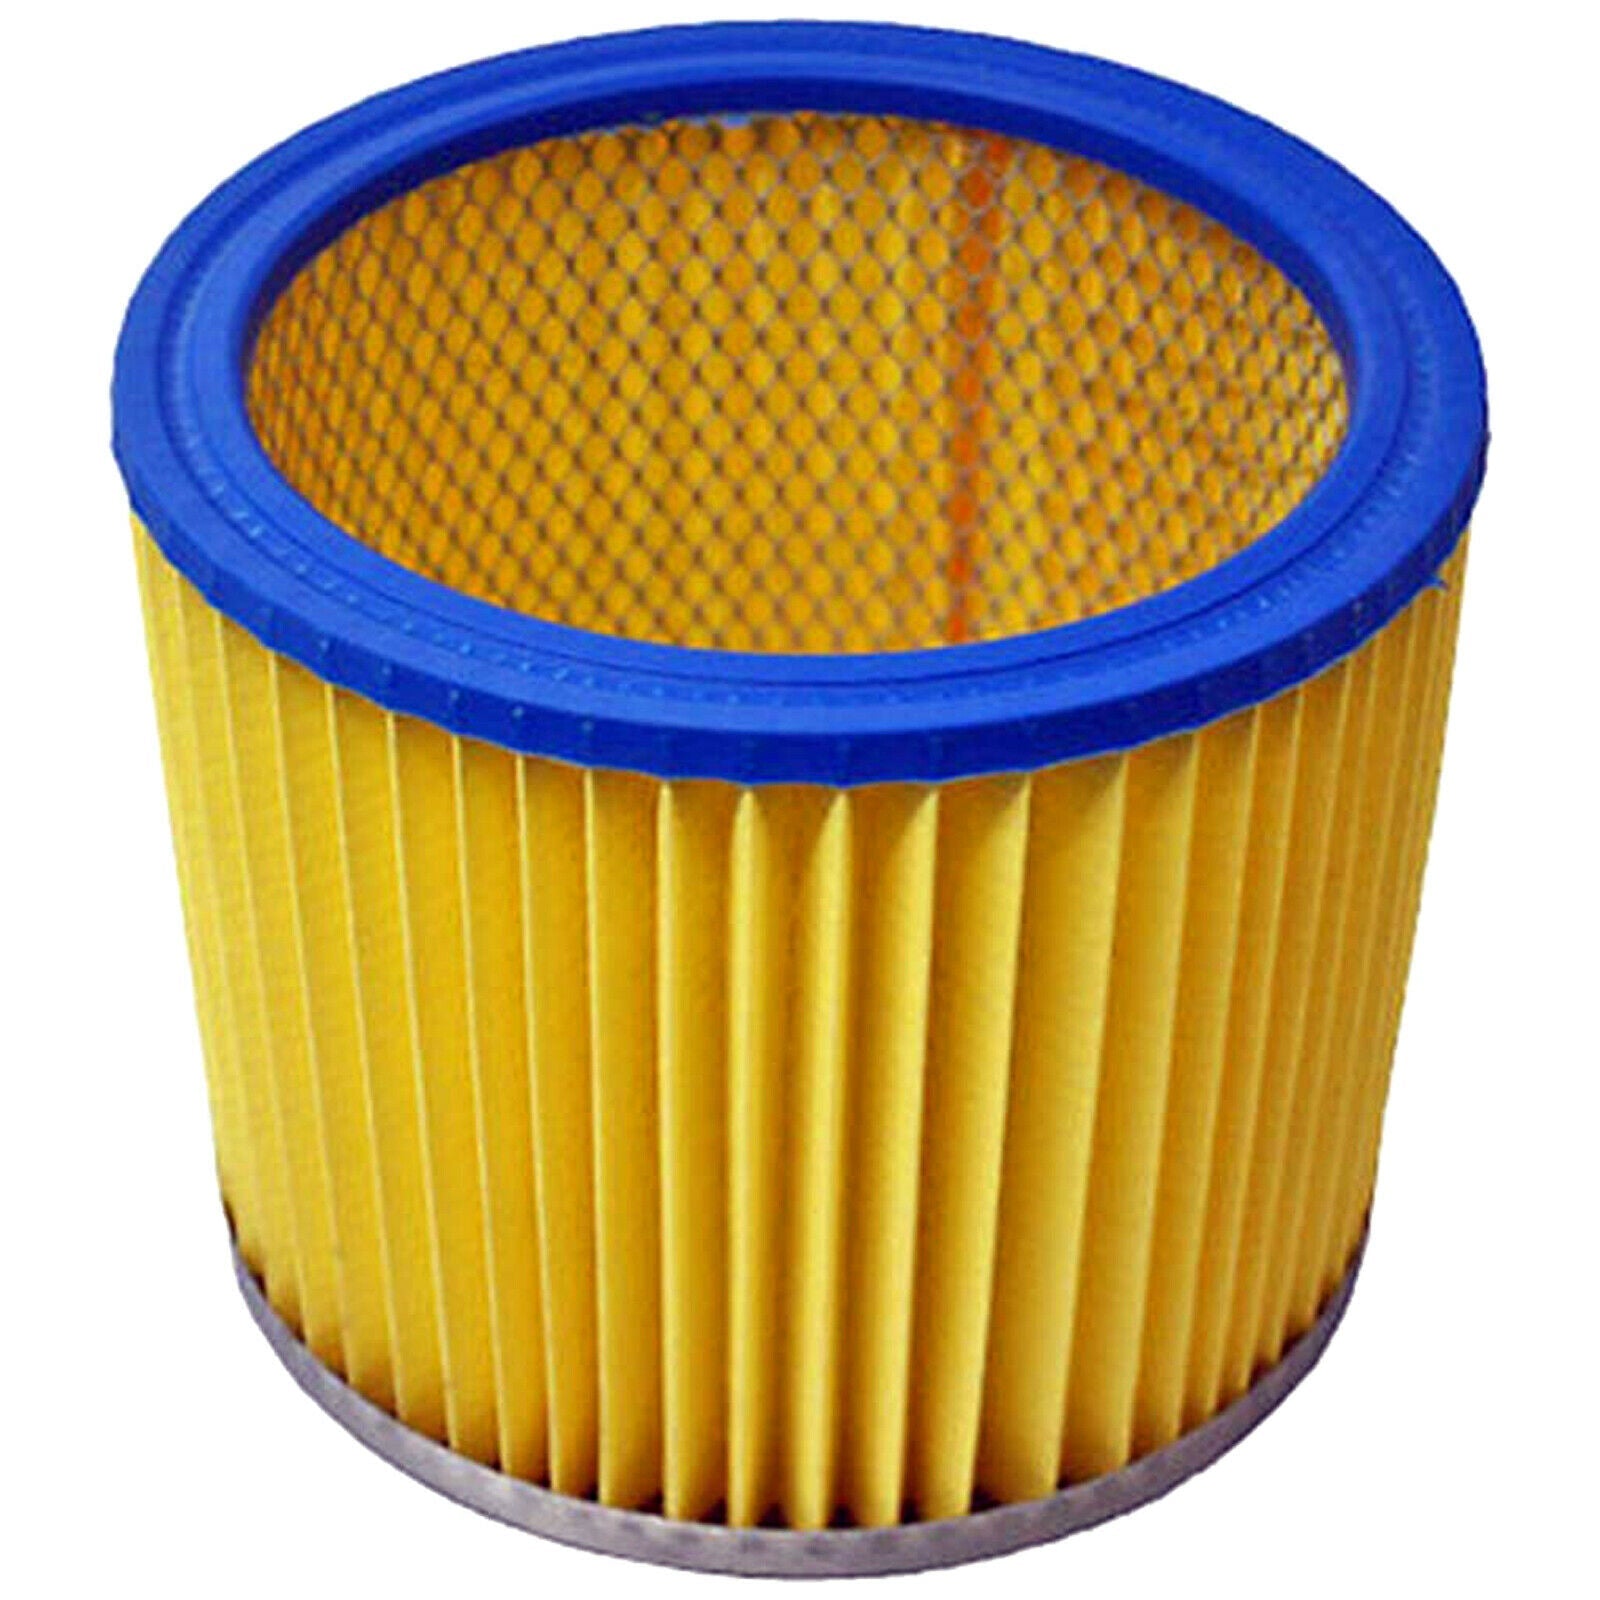 Filter Cartridges x 2 compatible with WICKES Wet & Dry Vacuum Cleaners